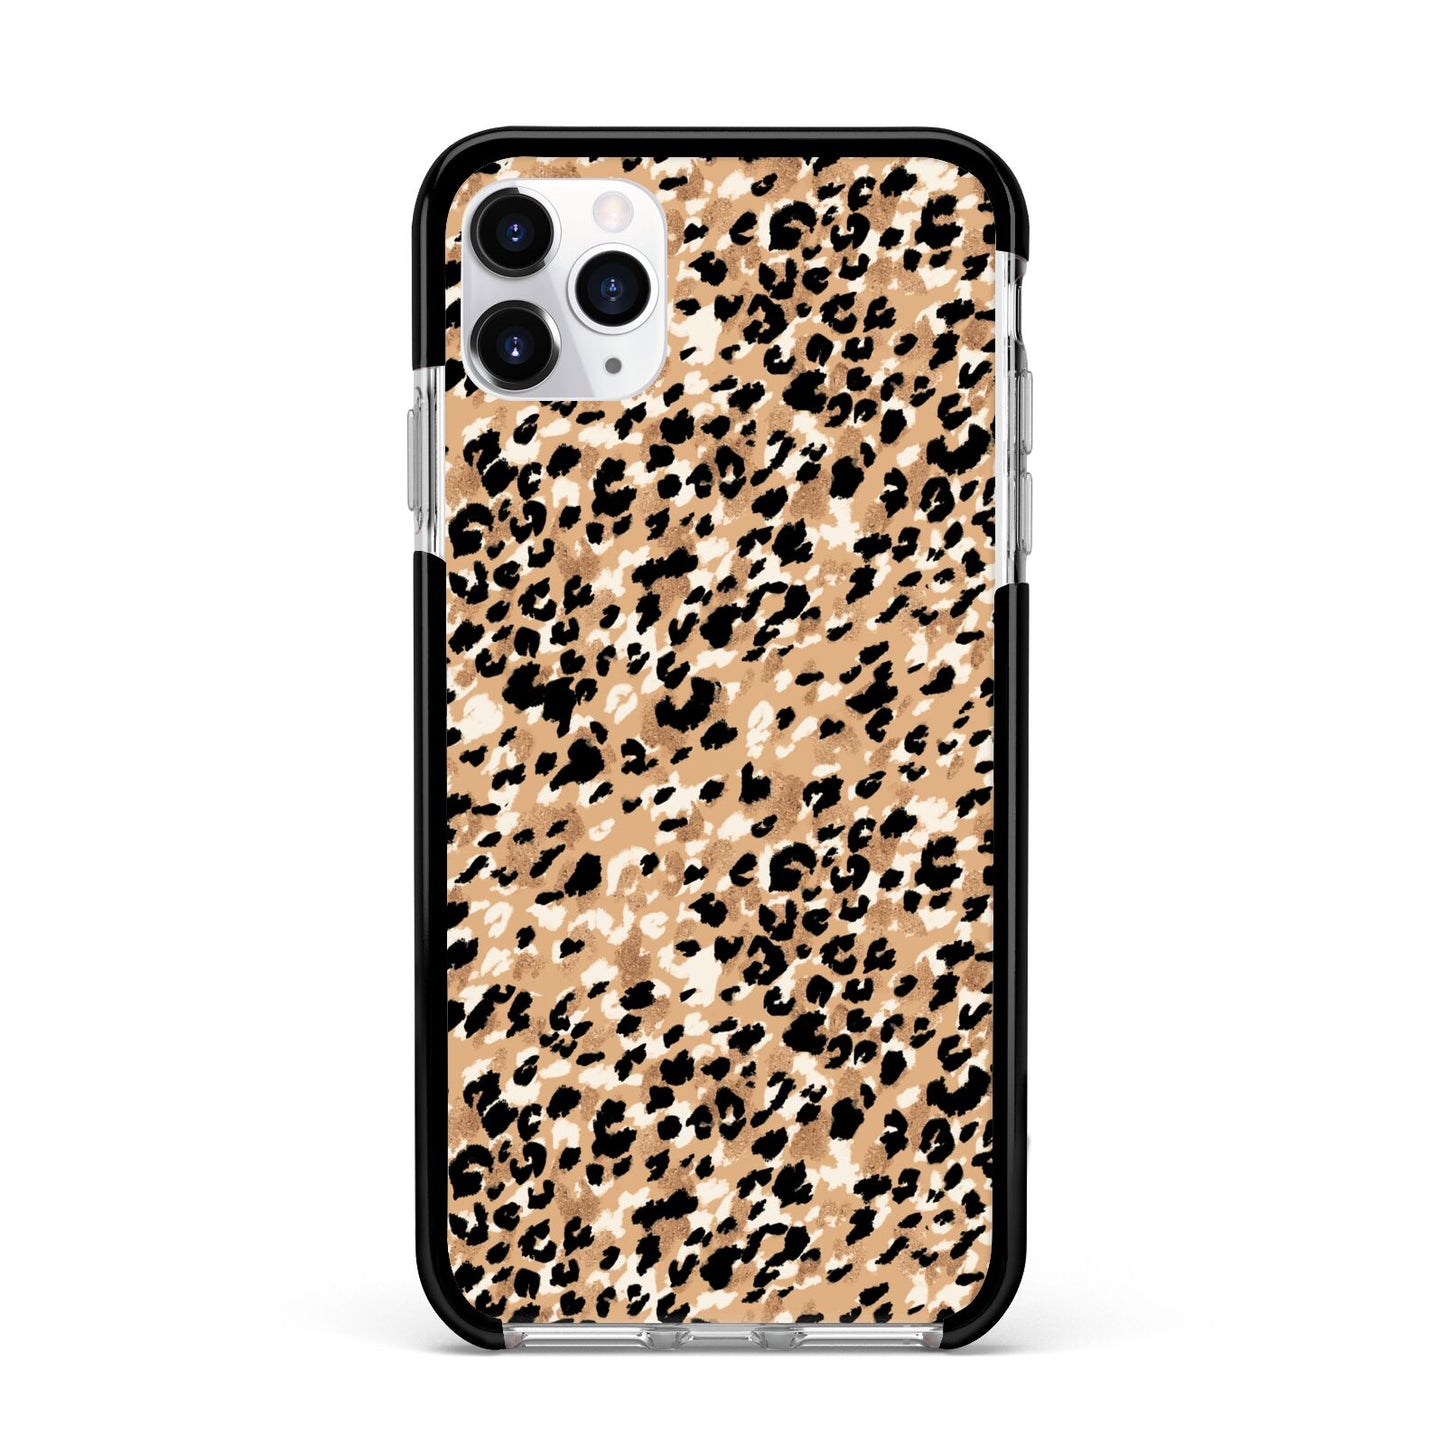 Leopard Print Apple iPhone 11 Pro Max in Silver with Black Impact Case